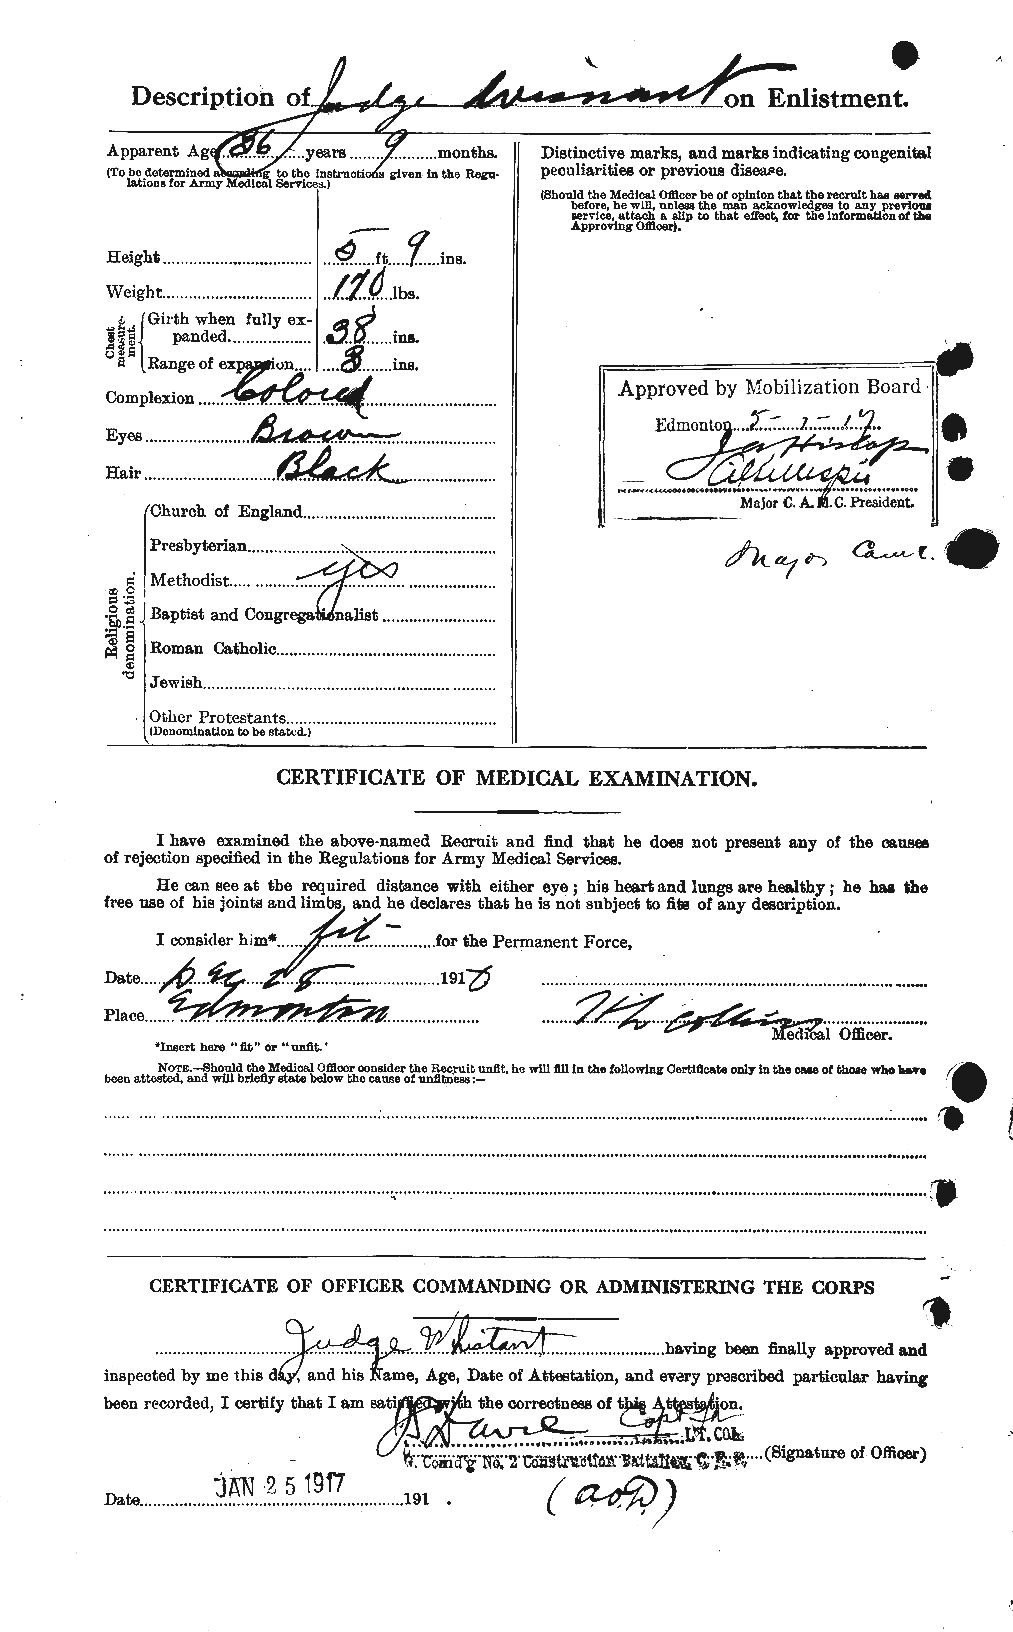 Personnel Records of the First World War - CEF 668790b